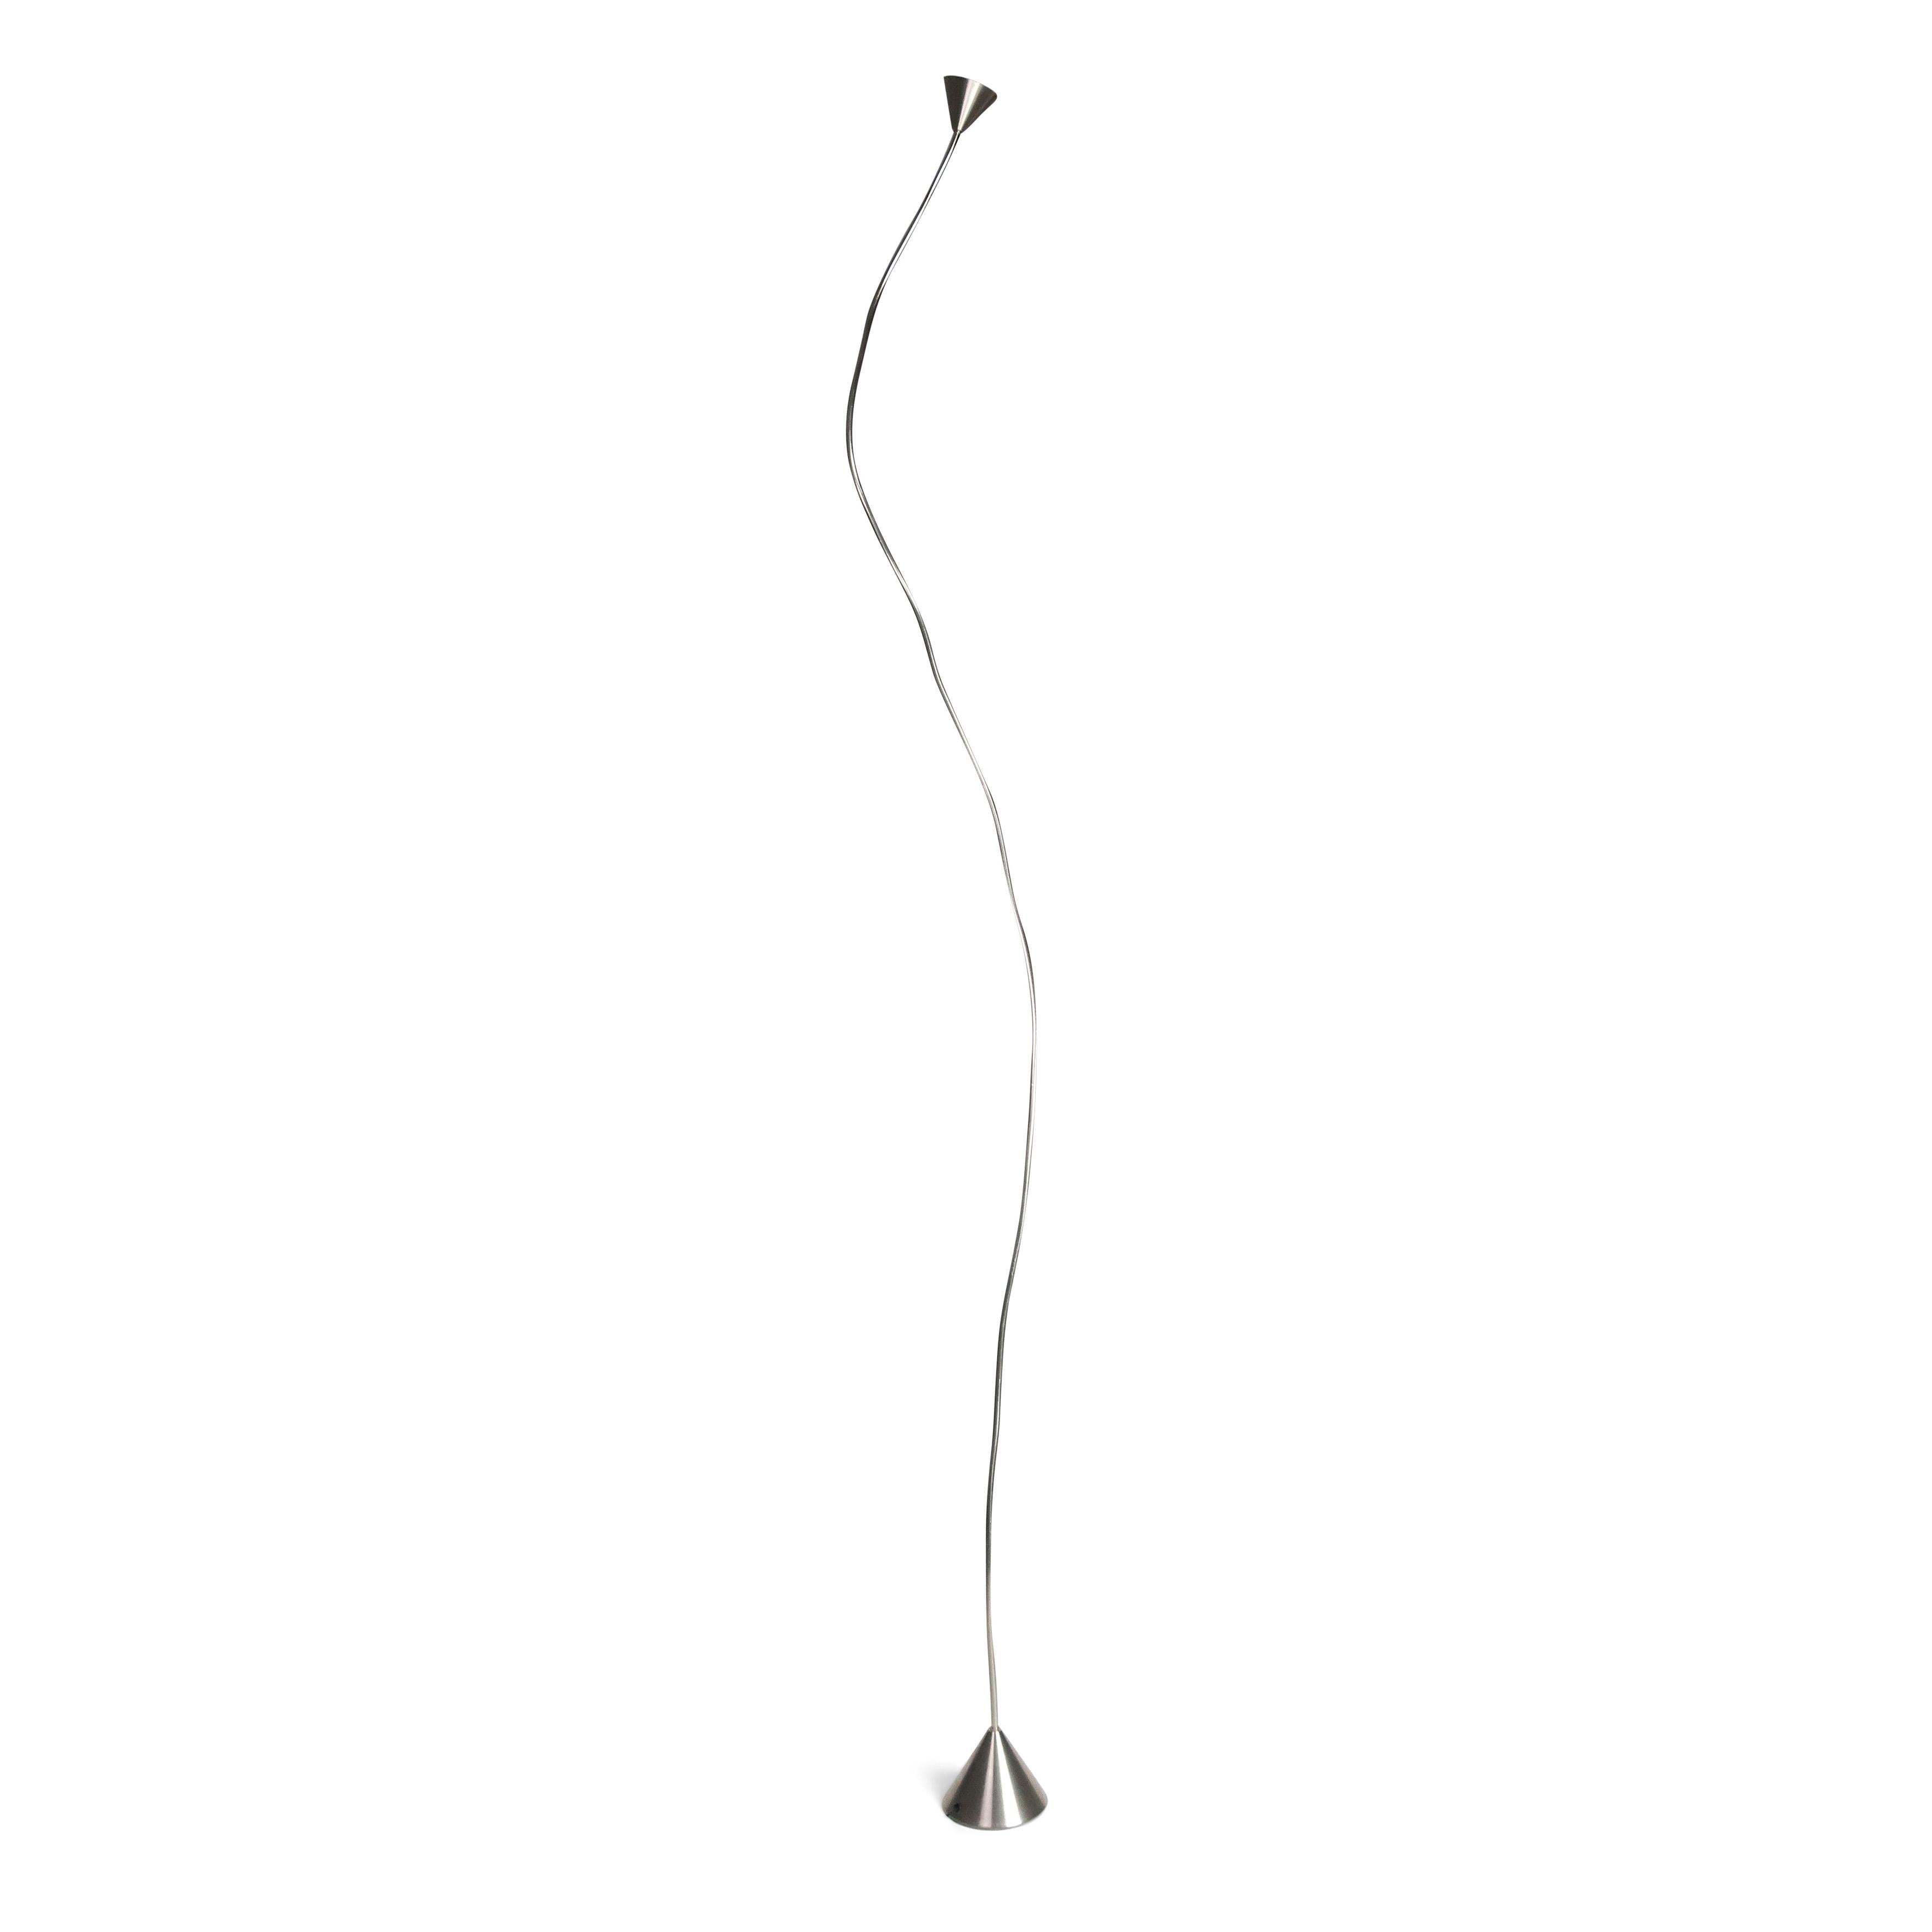 A nickel Papiro floor lamp by Sergio Calatroni for Pallucco in the large size (106” tall). An incredibly versatile lamp that can be bent and directed into a variety of shapes and configurations giving it a contemporary sculptural quality and